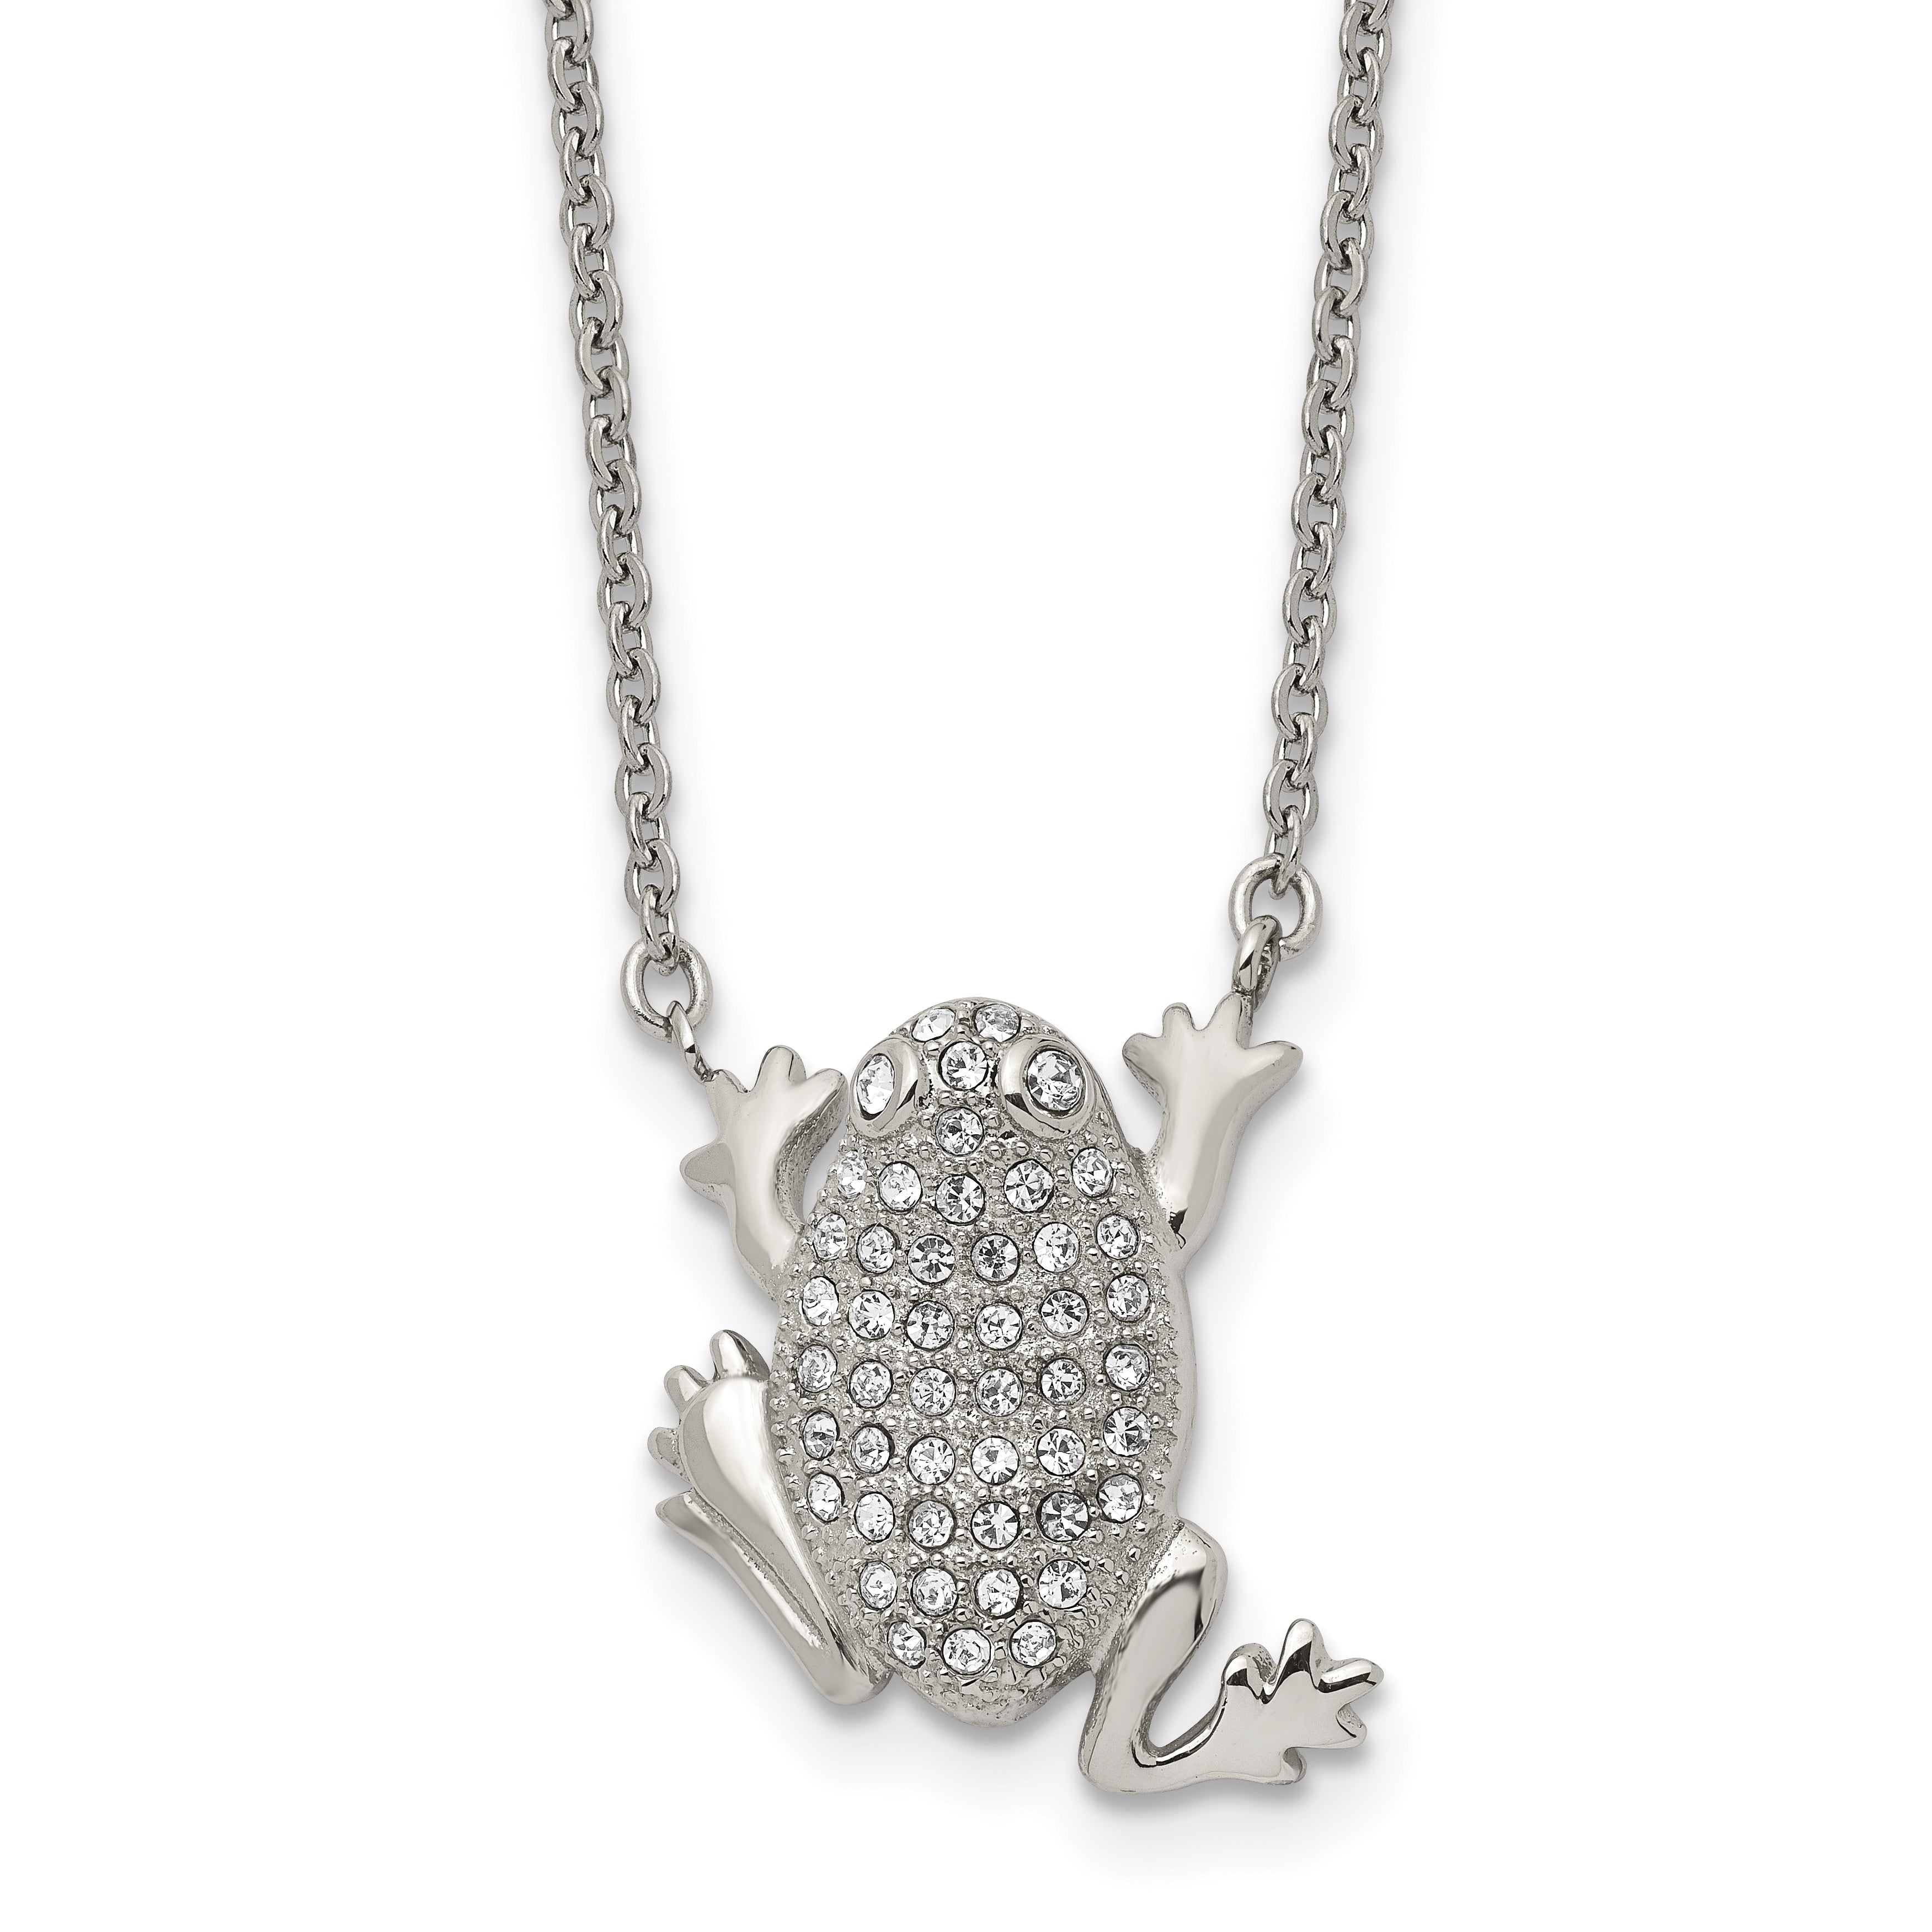 Stainless Steel Polished w/Preciosa Crystal Frog 16in w/2in ext Necklace